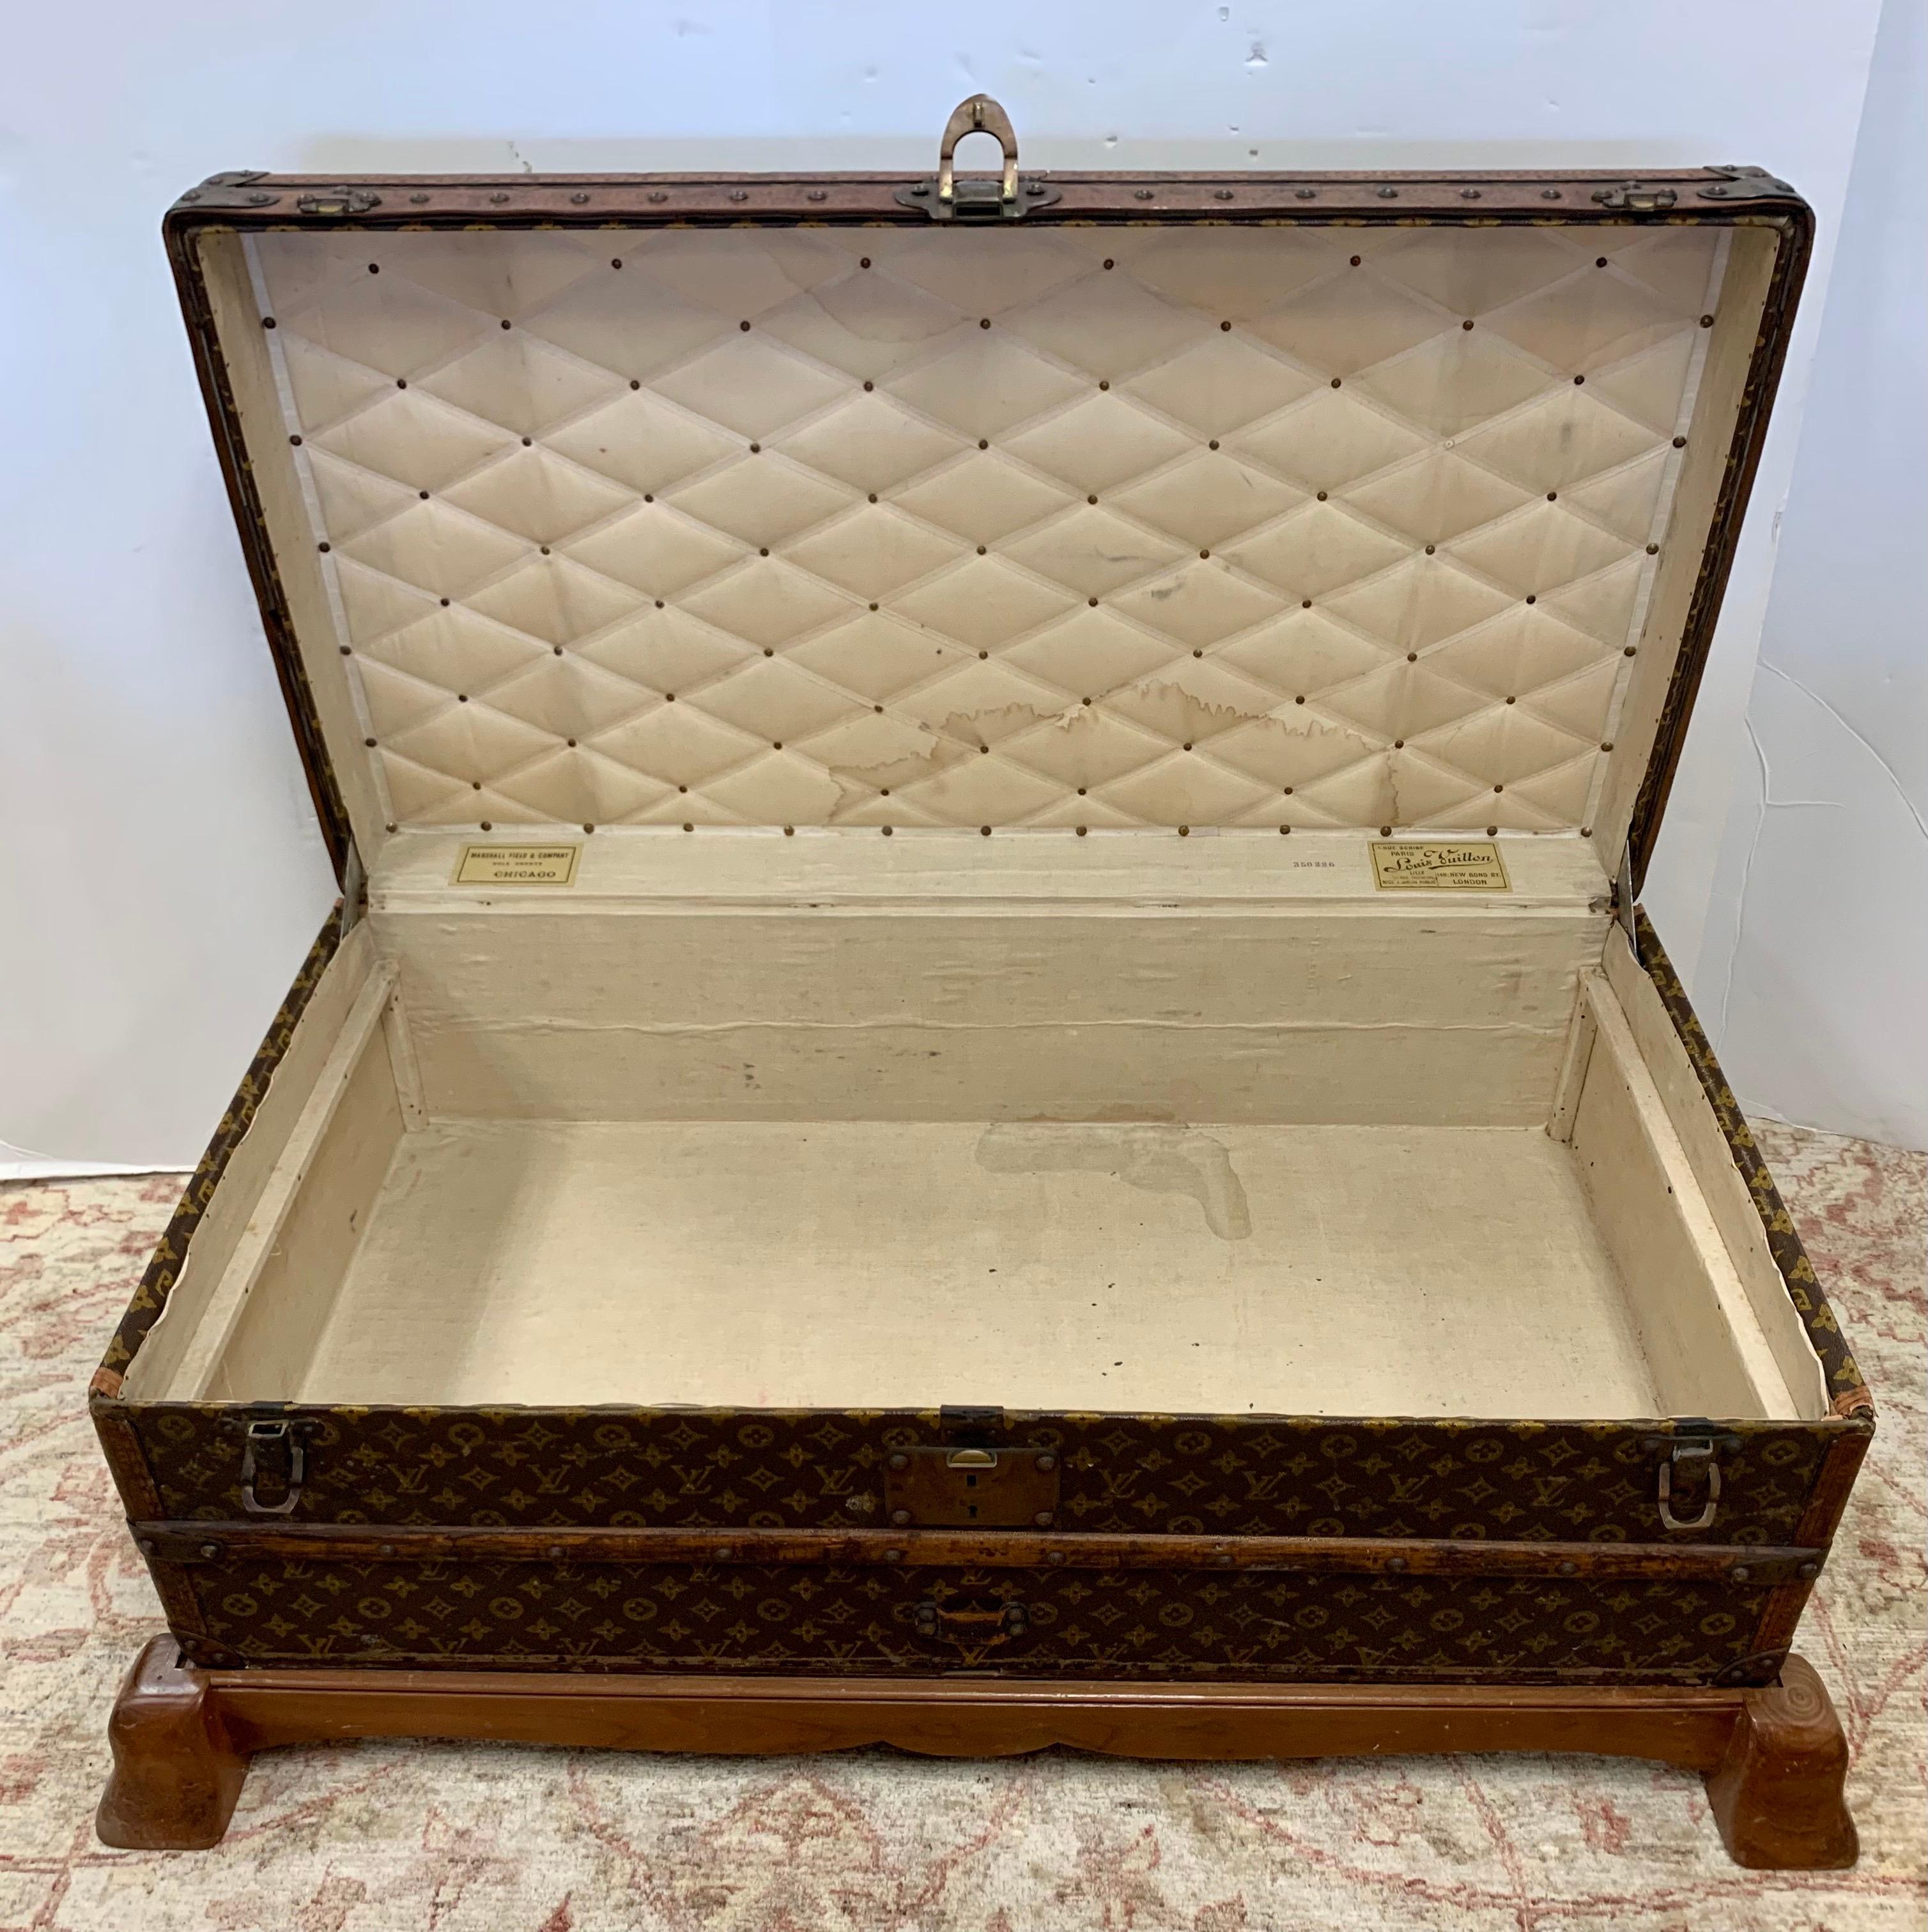 Antique Louis Vuitton Monogram Steamer Trunk Coffee Table For Sale at ...